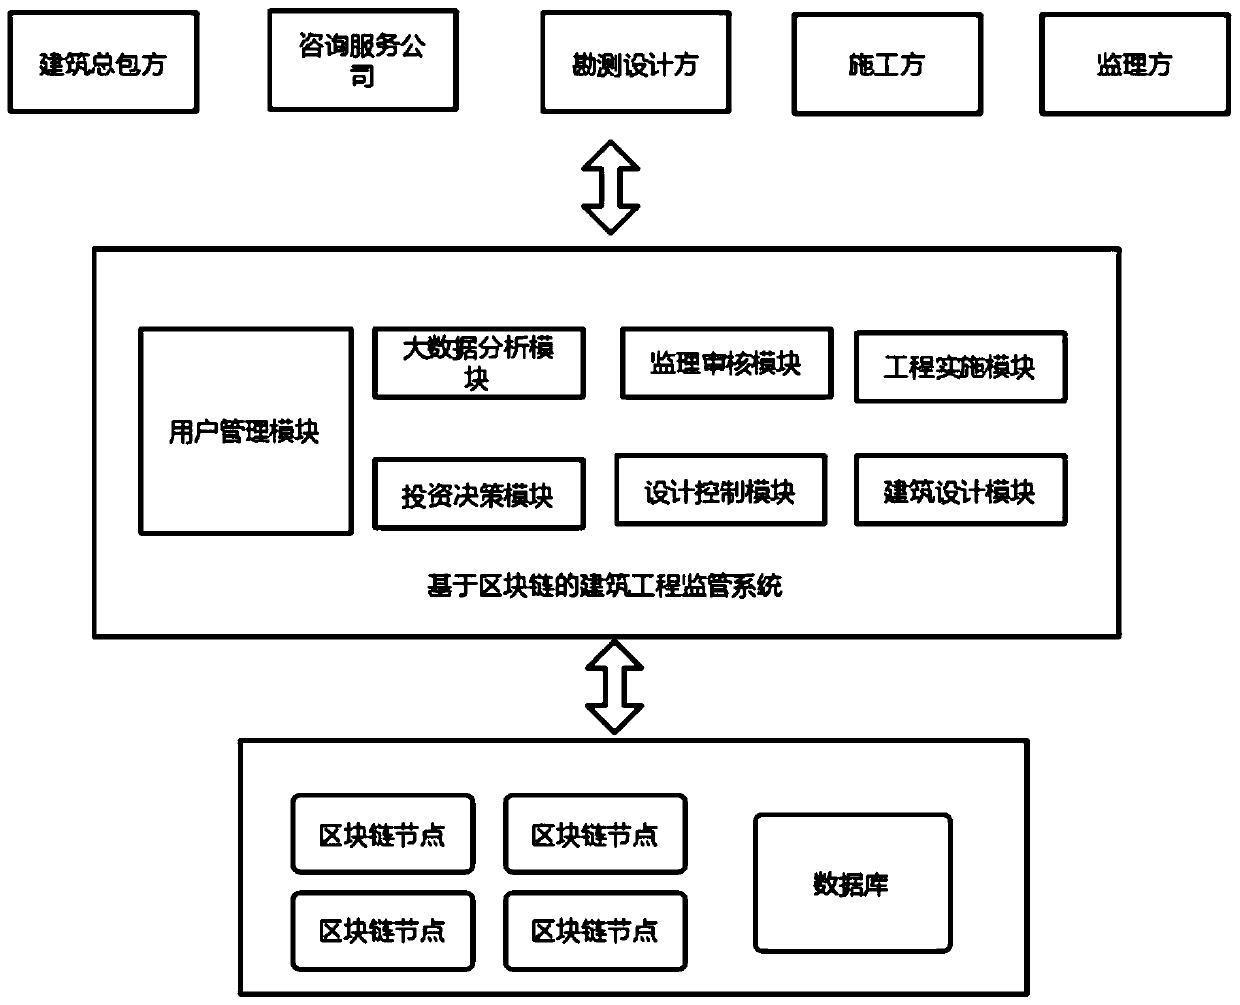 Building engineering cost supervision system and method based on block chain